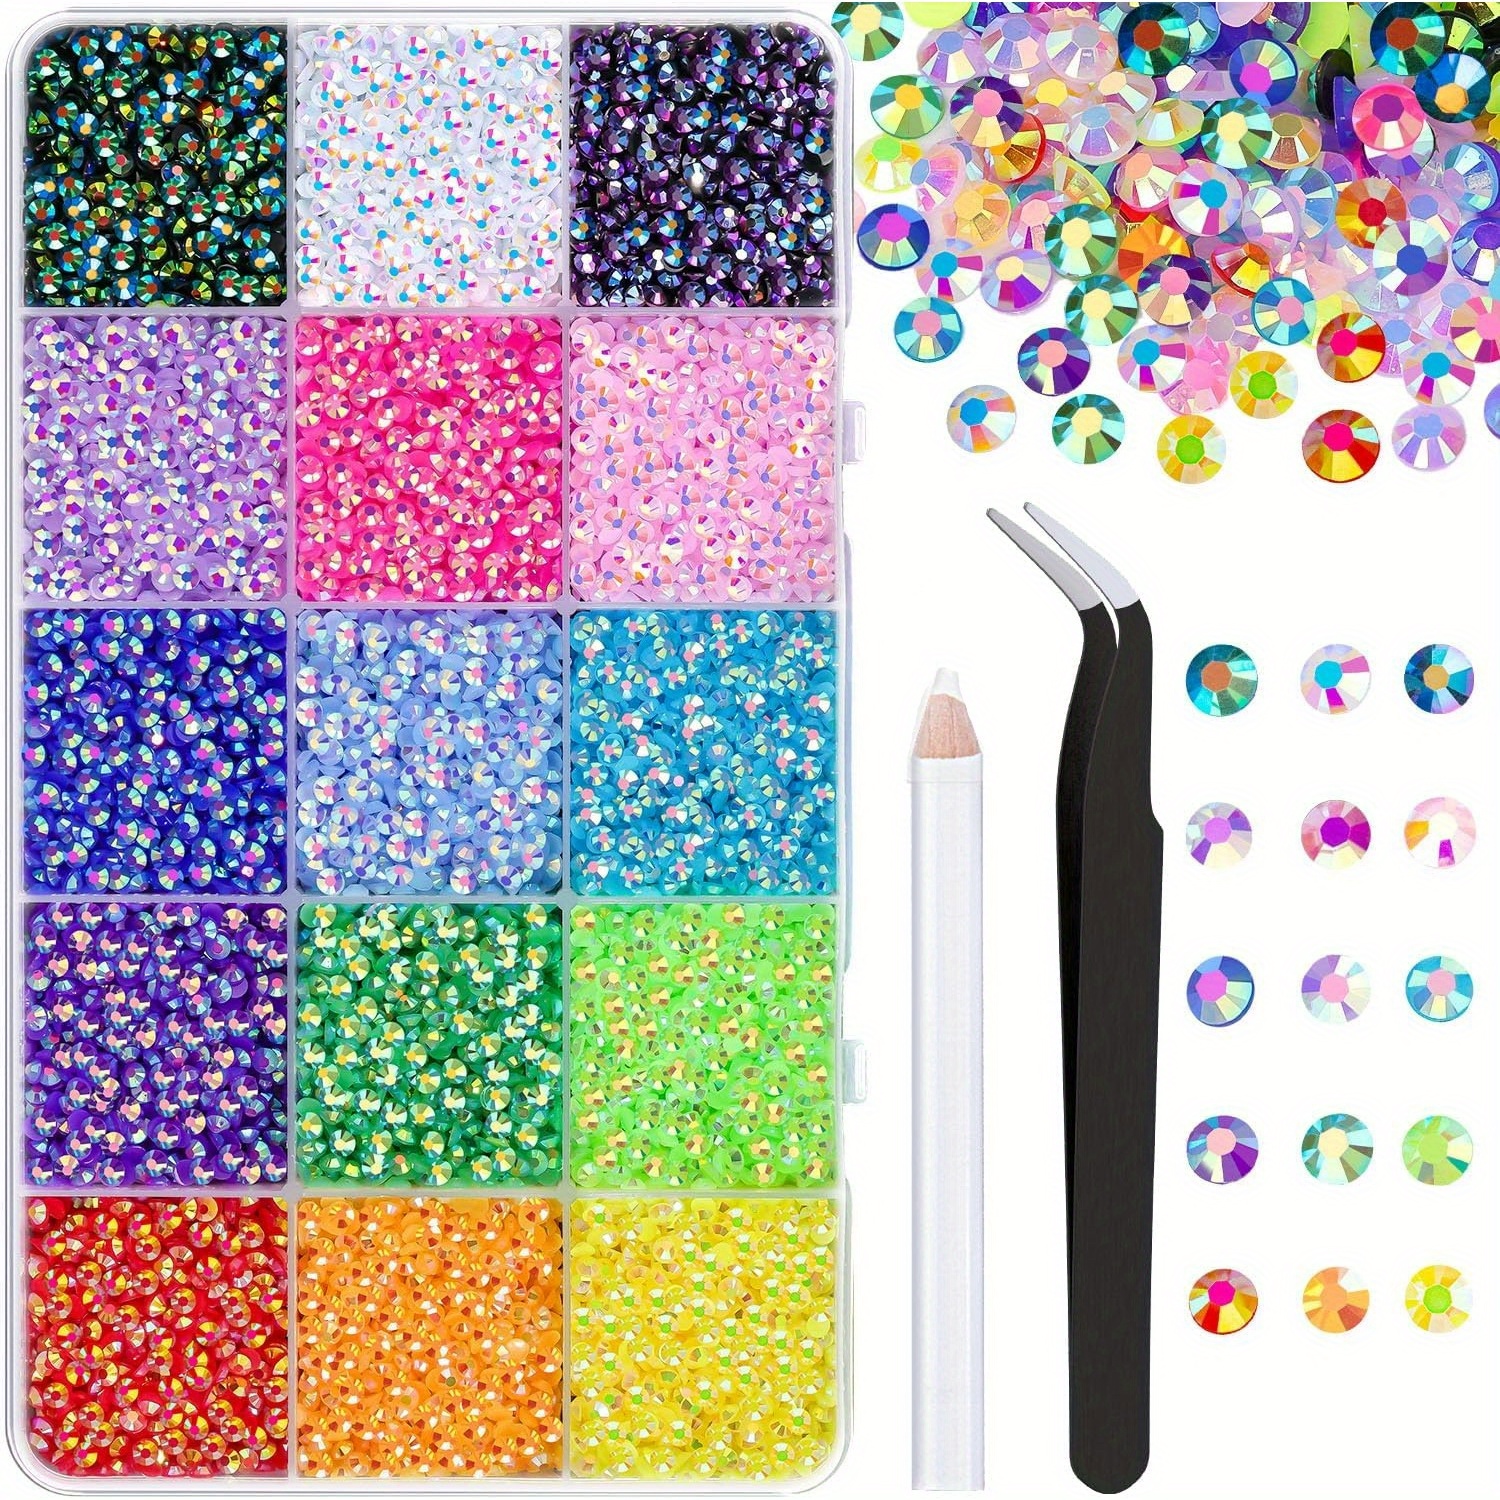 

Resin Jelly Rhinestones With Tweezers For Crafting, Mixed-color Non Hotfix Flatback Gems, Bedazzling Rhinestones For Diy Crafts Clothing Tumblers Mugs Shoes Fabric Decor